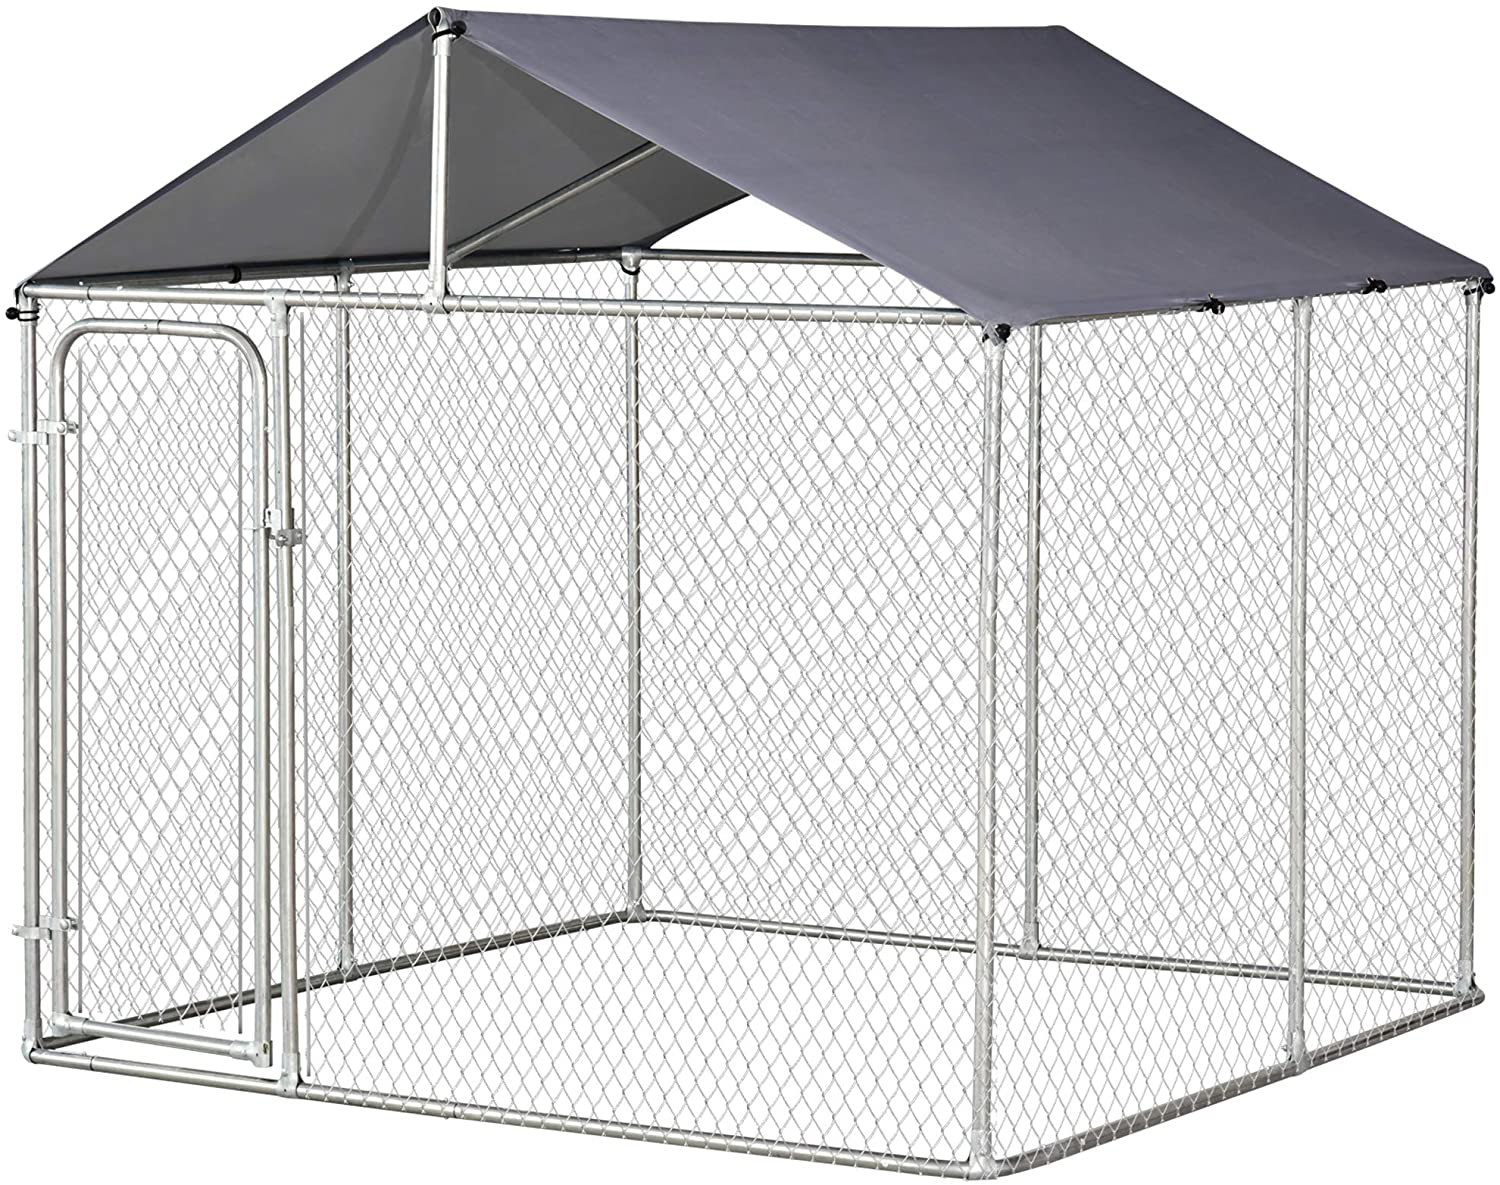 Pawhut Outdoor Dog Kennel Galvanized Steel Fence with Cover Secure Lock Mesh Sidewalls for Backyard Animals & Pet Supplies > Pet Supplies > Dog Supplies > Dog Houses PawHut 10' x 10' x 7.6'  